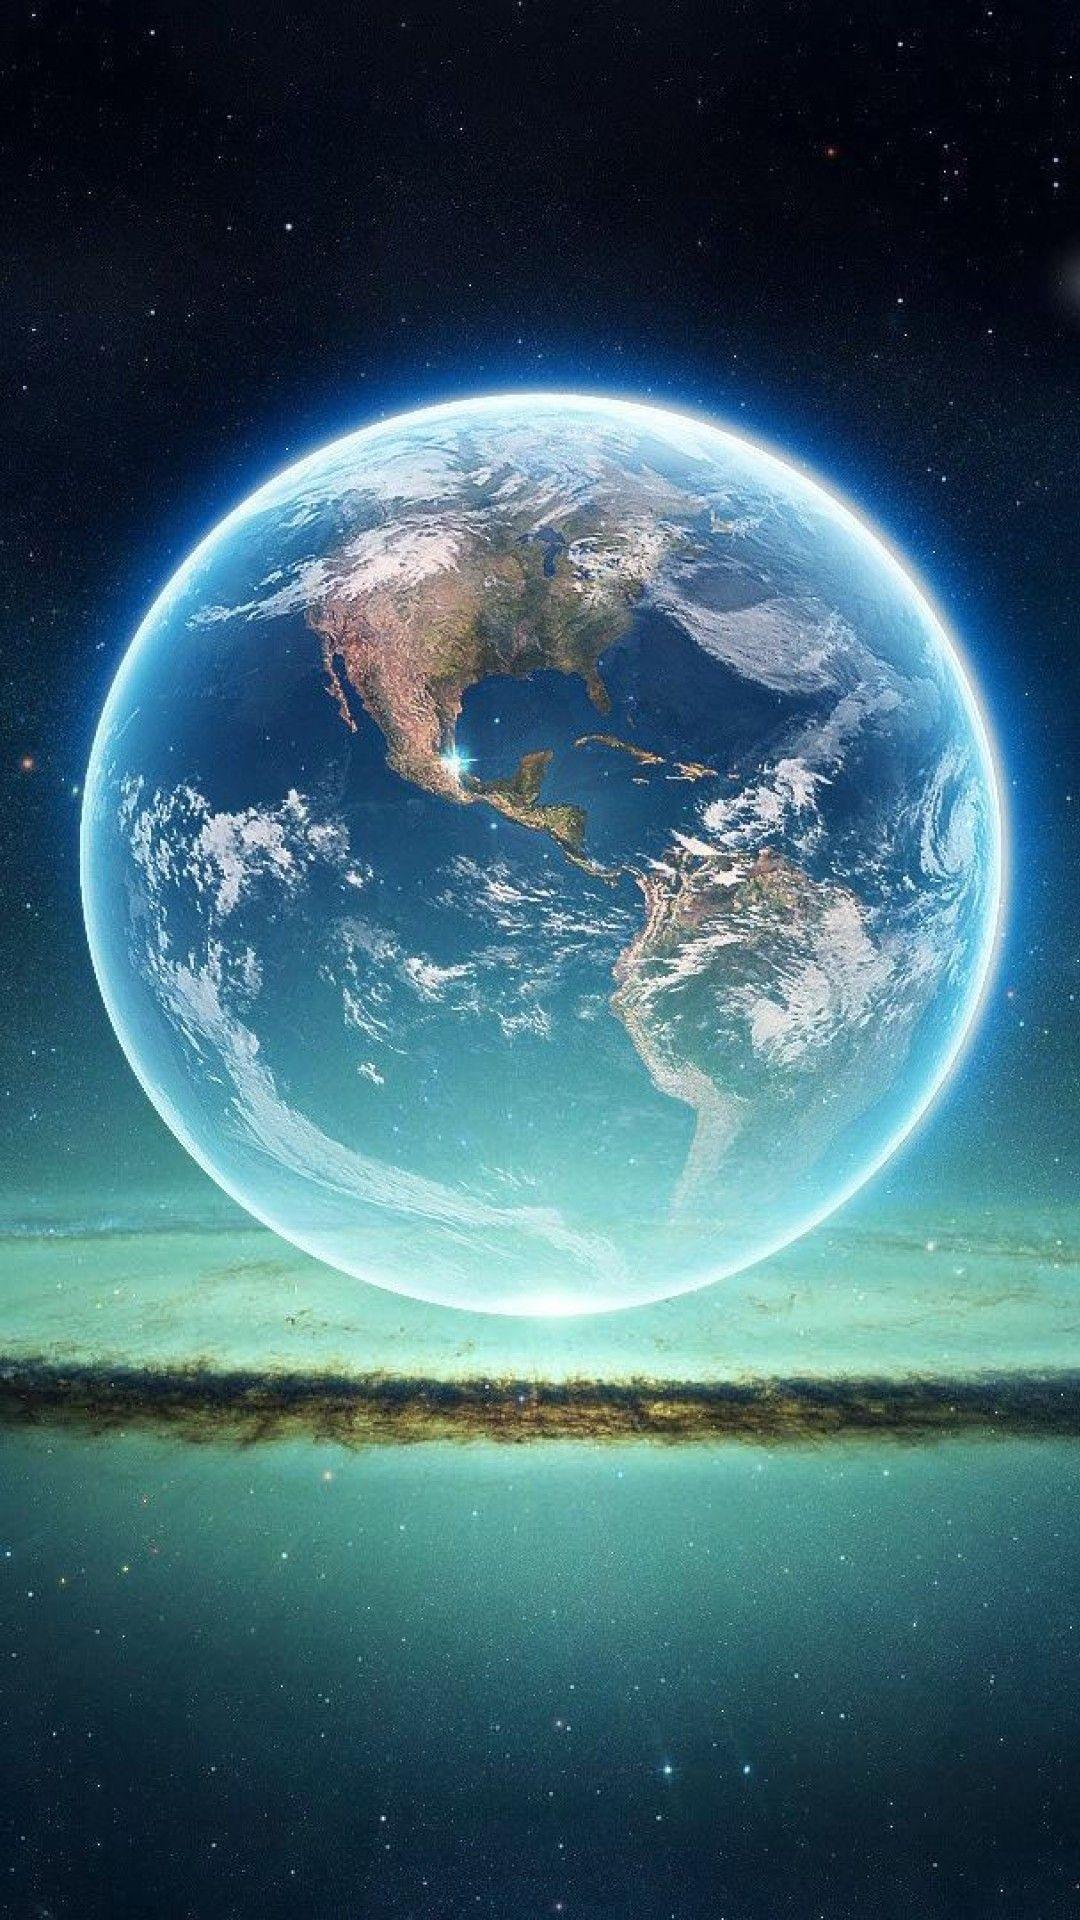 iPhone Earth Wallpapers - Top Free iPhone Earth Backgrounds